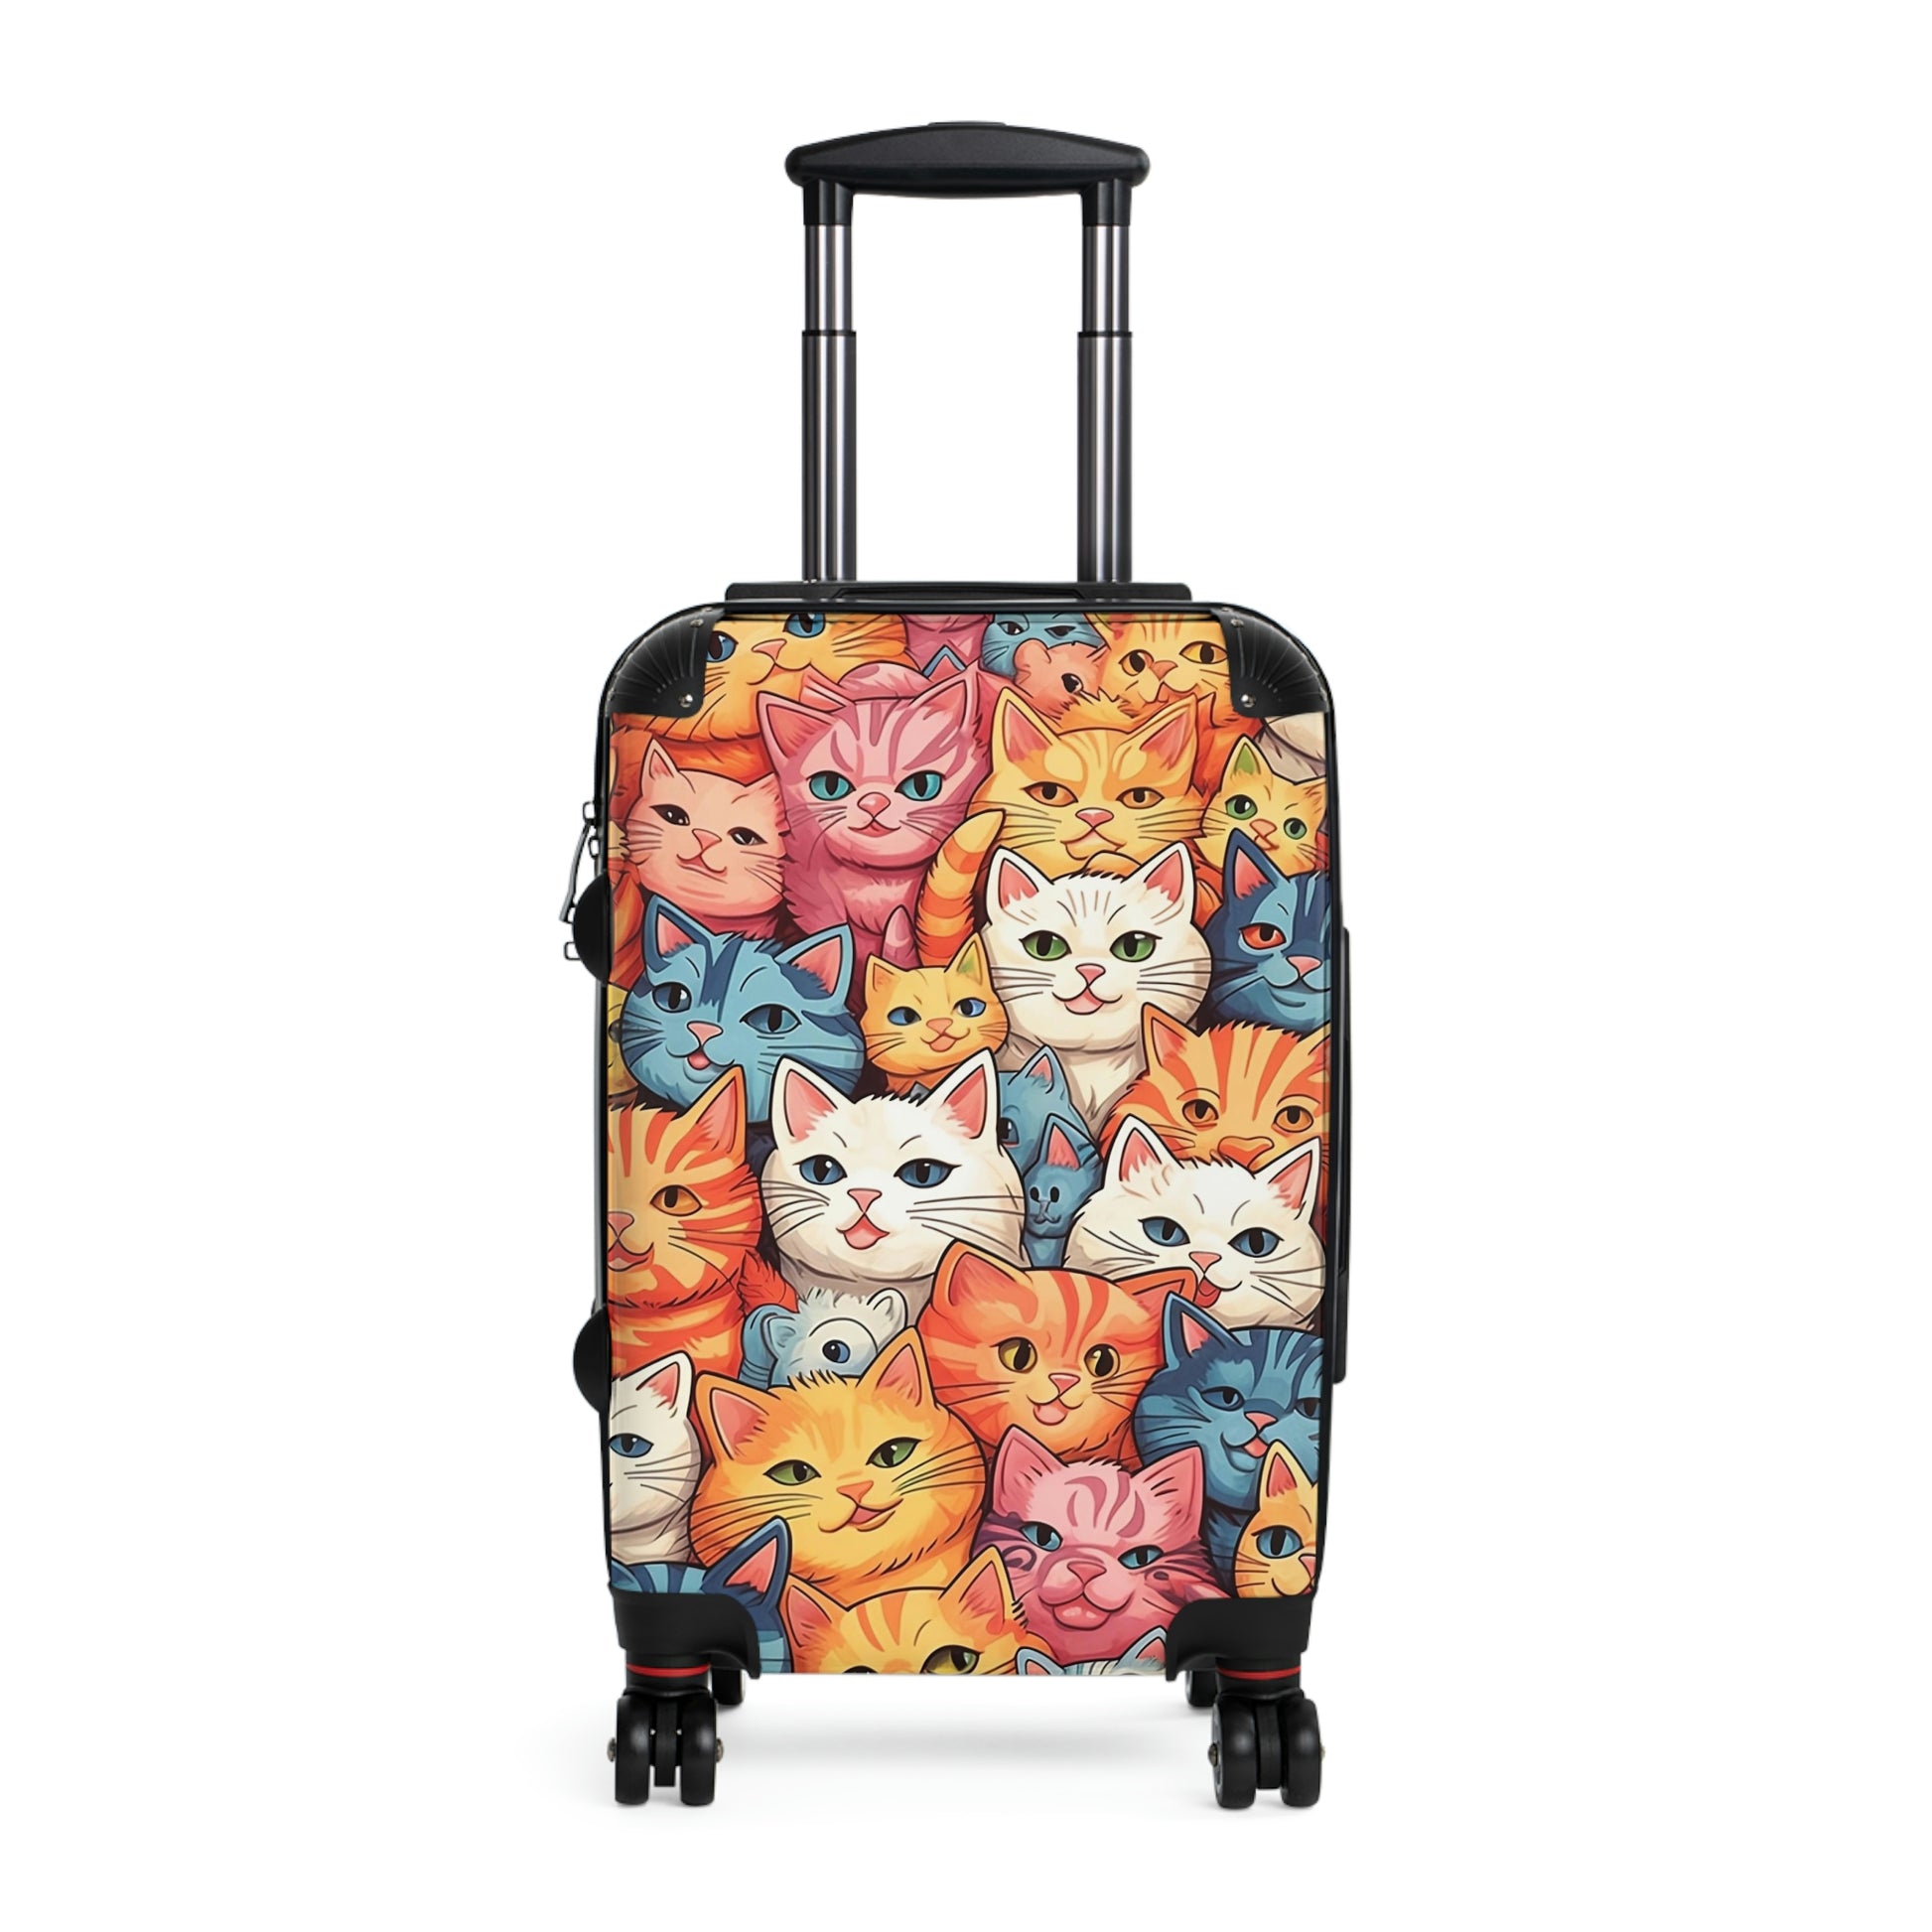 Cats Suitcase Luggage, Kittens Carry On With 4 Wheels Cabin Travel Small Large Set Rolling Spinner Lock Designer Hard Shell Case Starcove Fashion